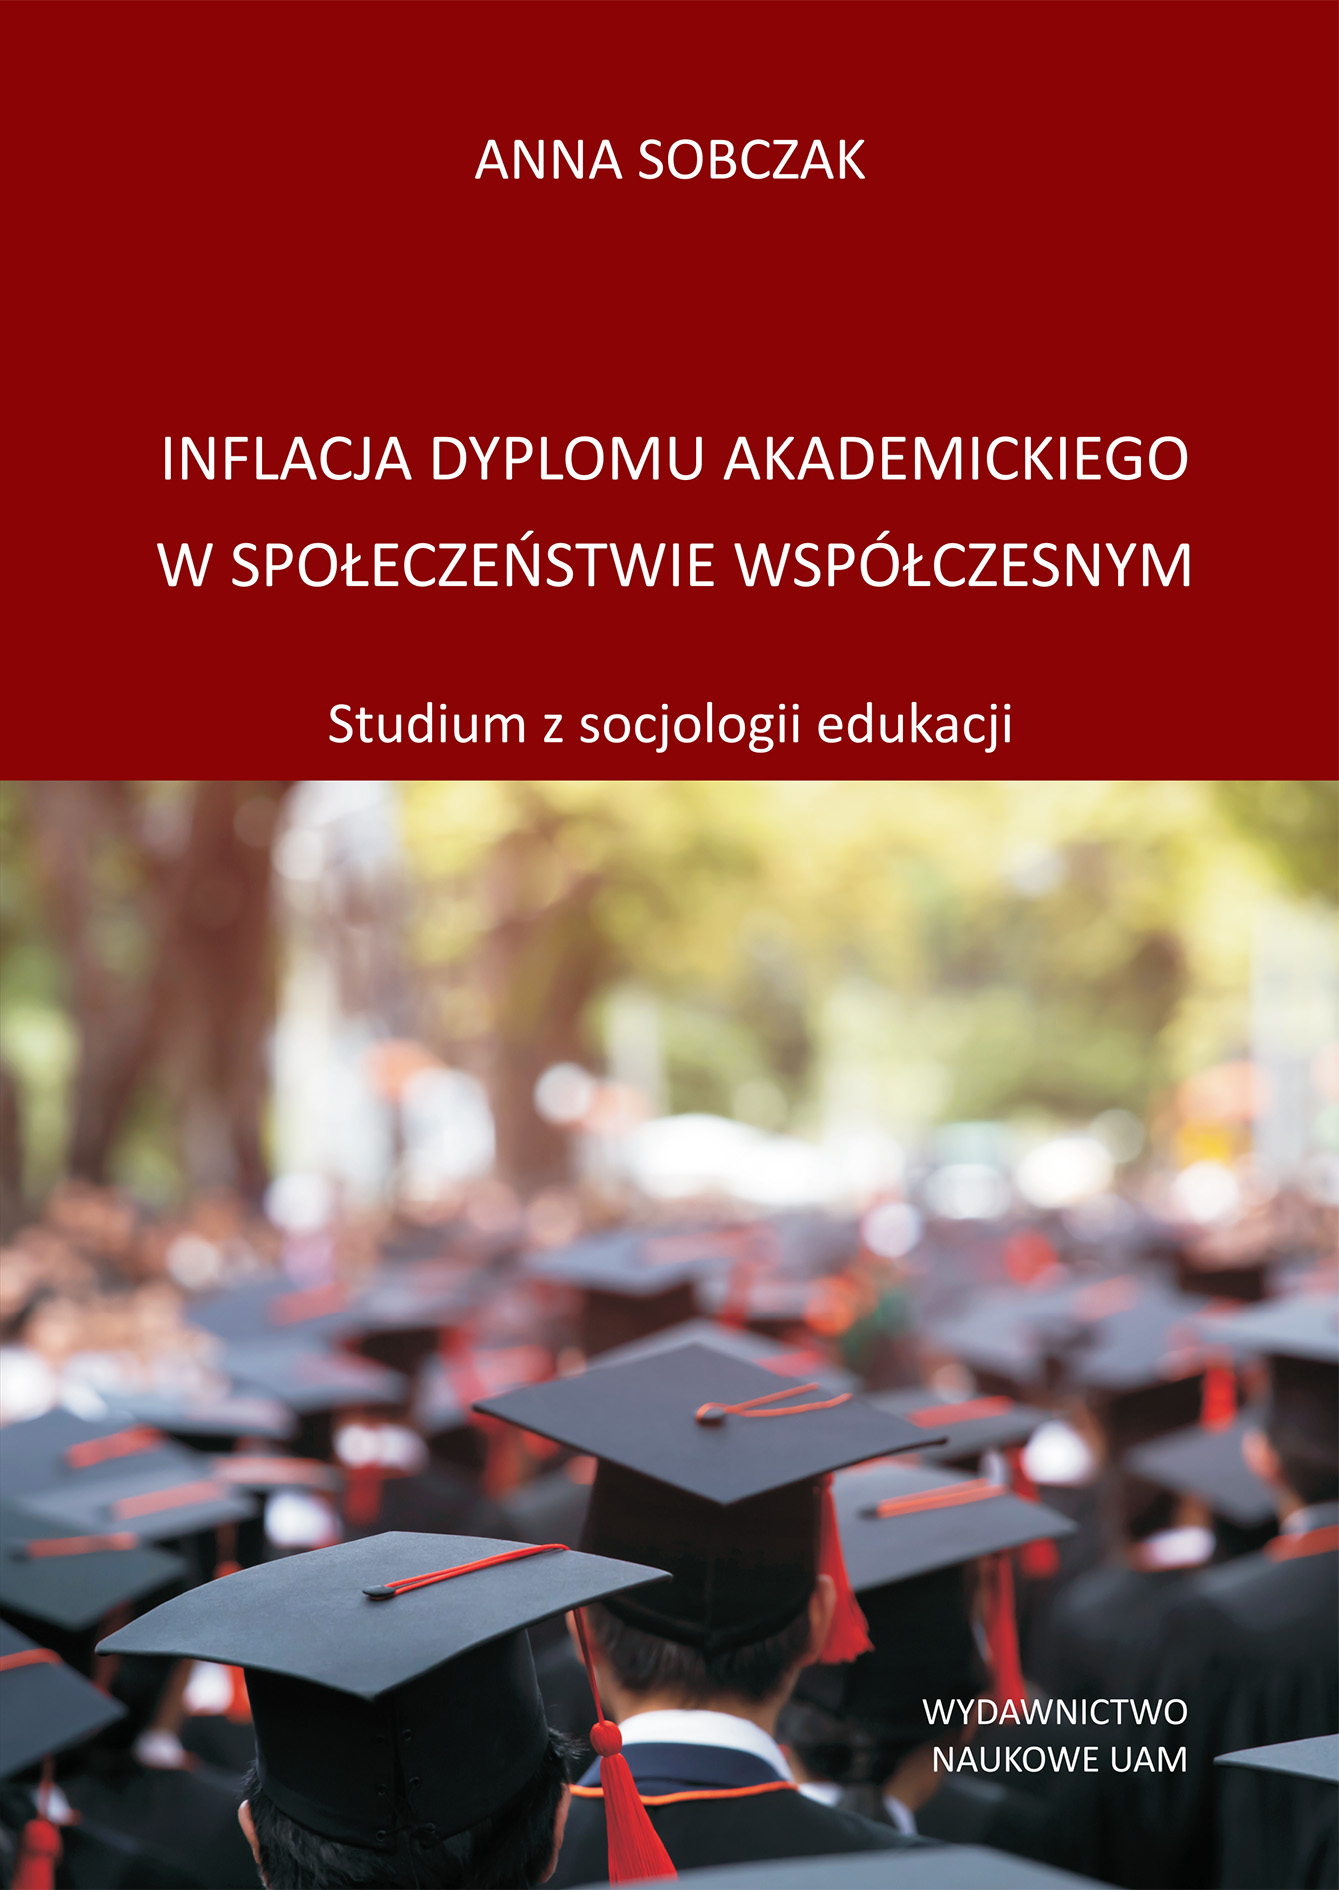 Academic Diploma Inflation in Contemporary Society